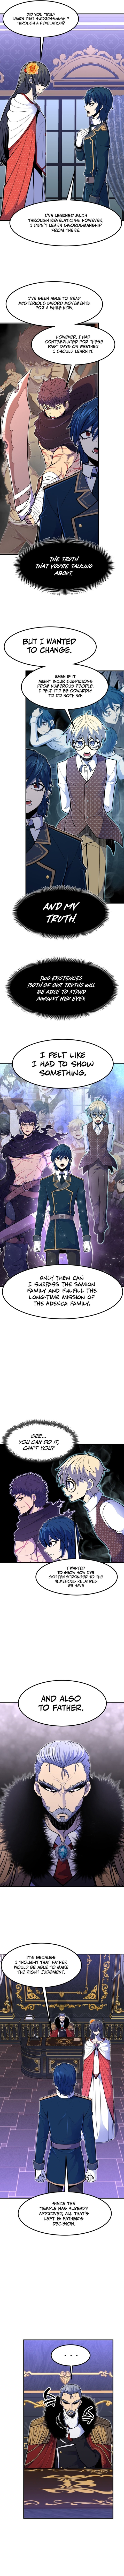 Standard of Reincarnation - Chapter 12 Page 6